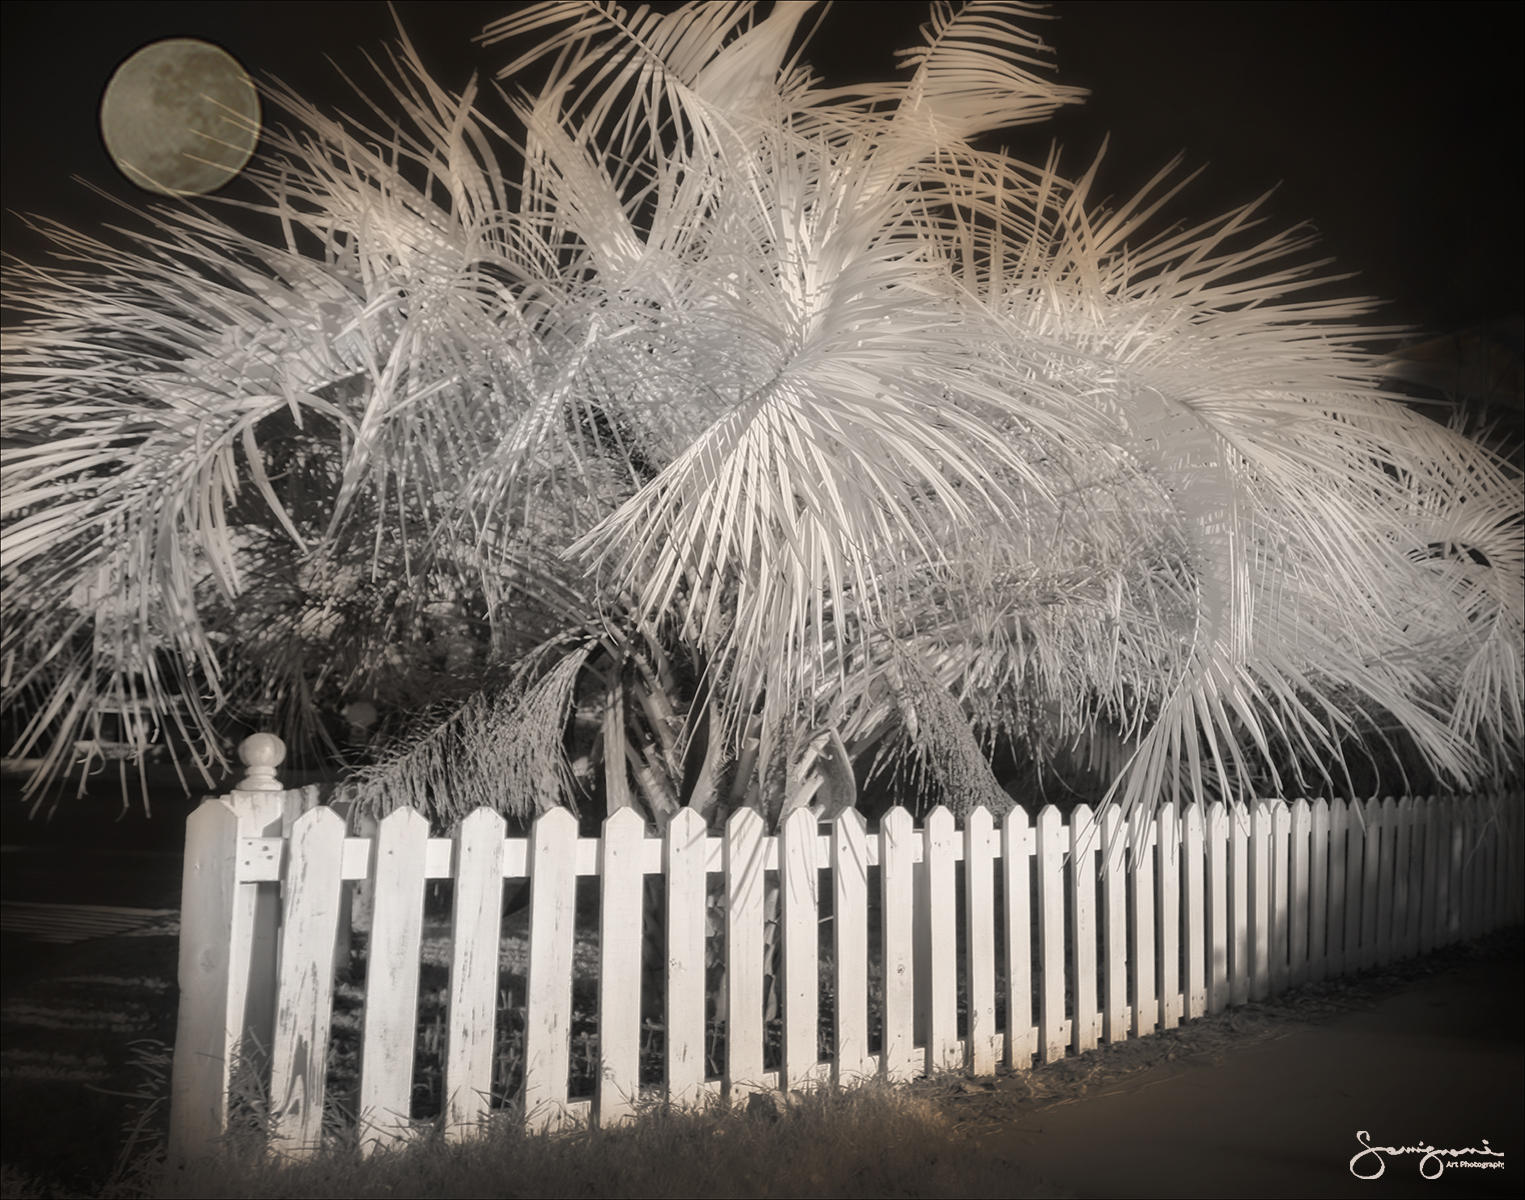 White Picket Fence-
South Port, NC